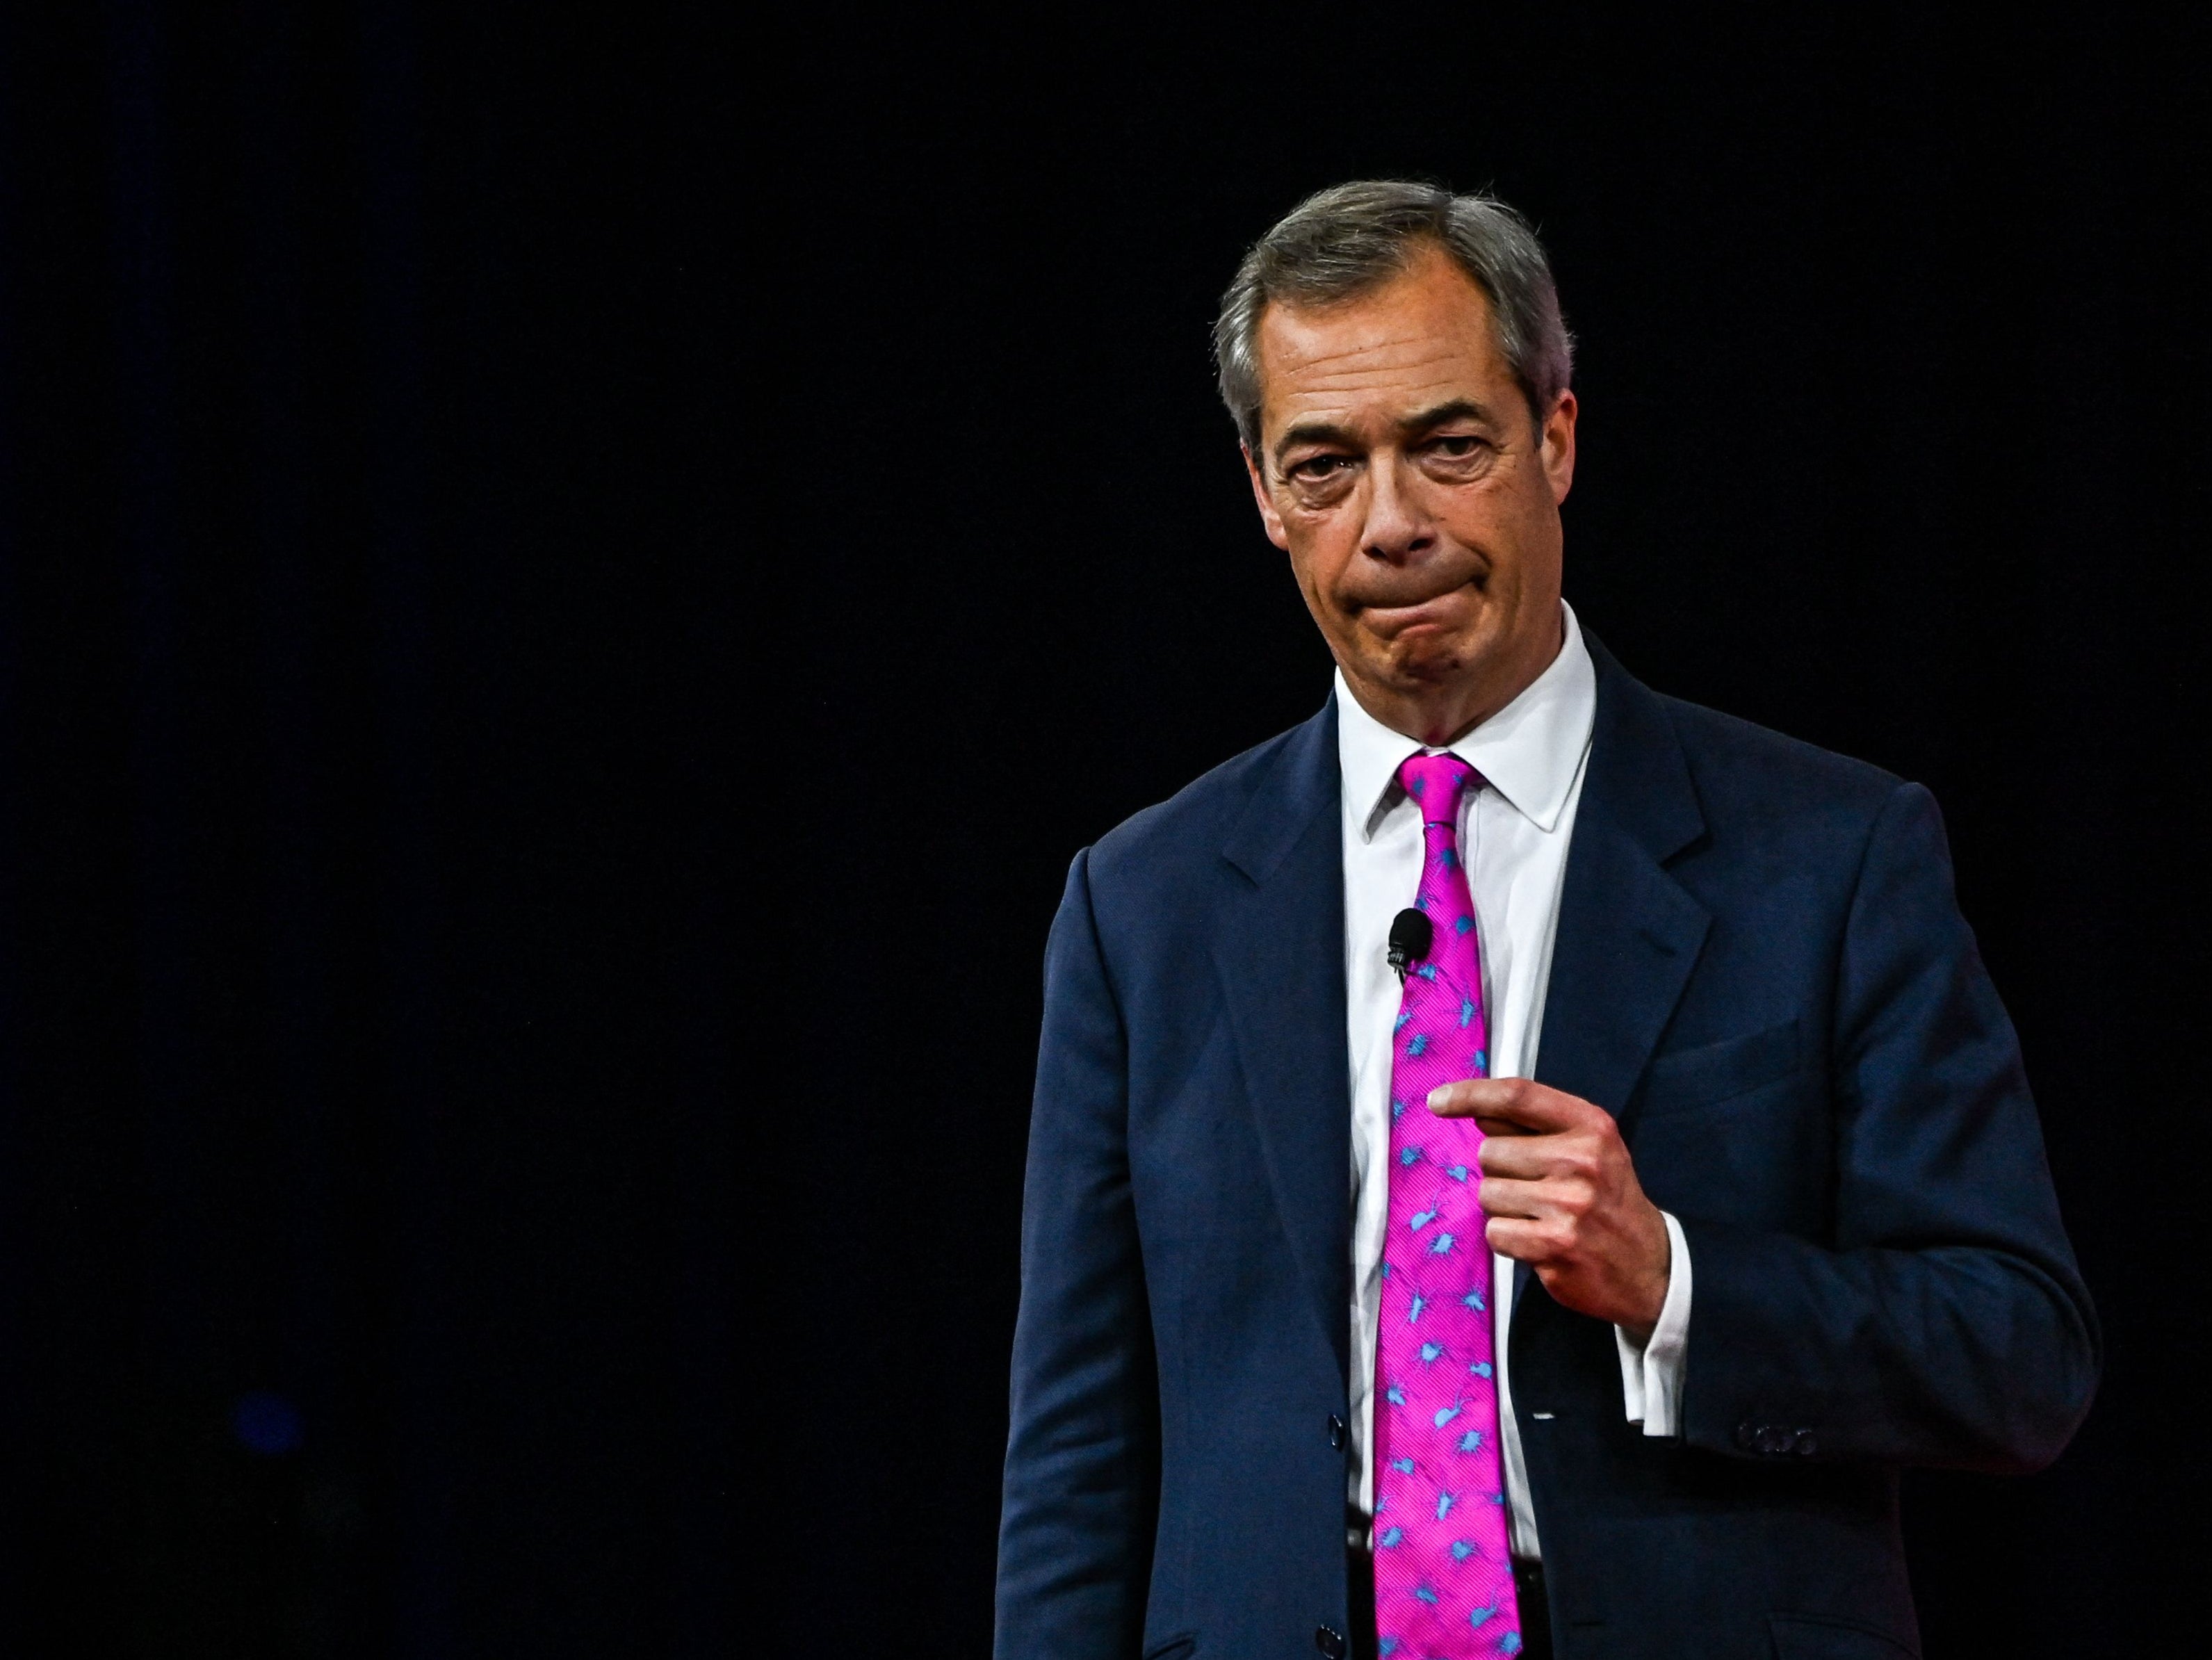 Nigel Farage is said to have conversations with some Tory red-wall MPs